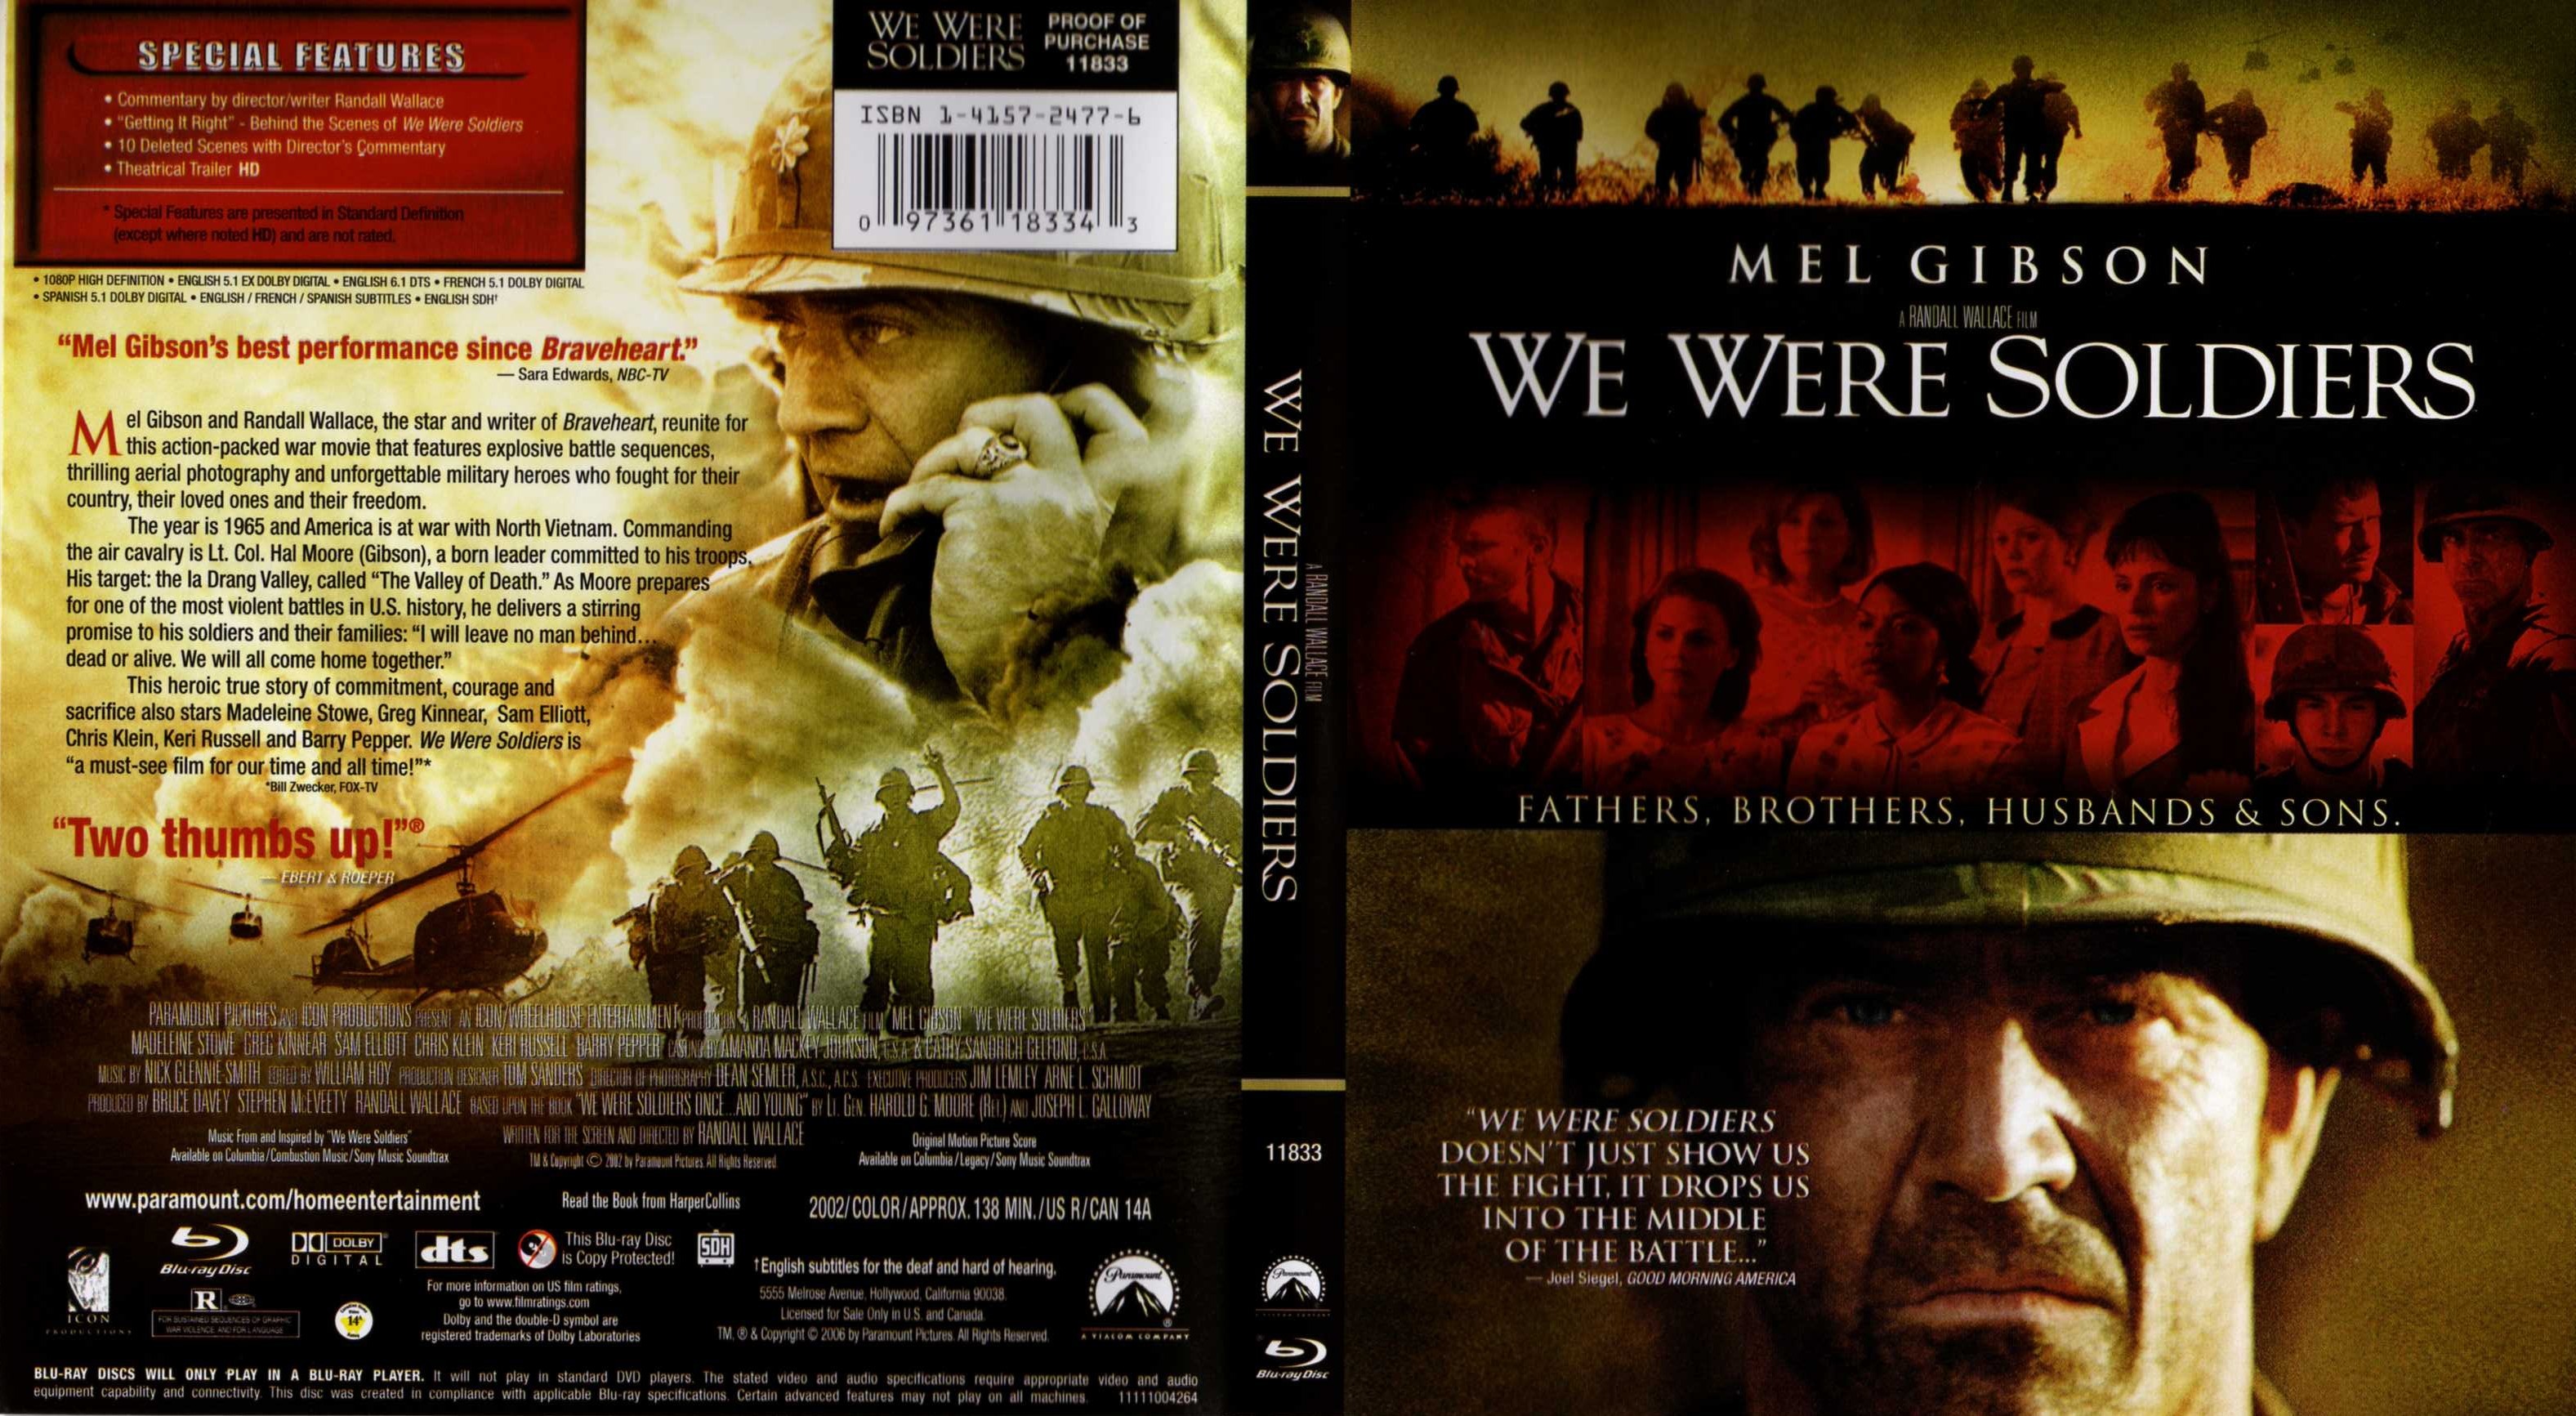 Jaquette DVD We Were Soldiers (Canadienne) (BLU-RAY)